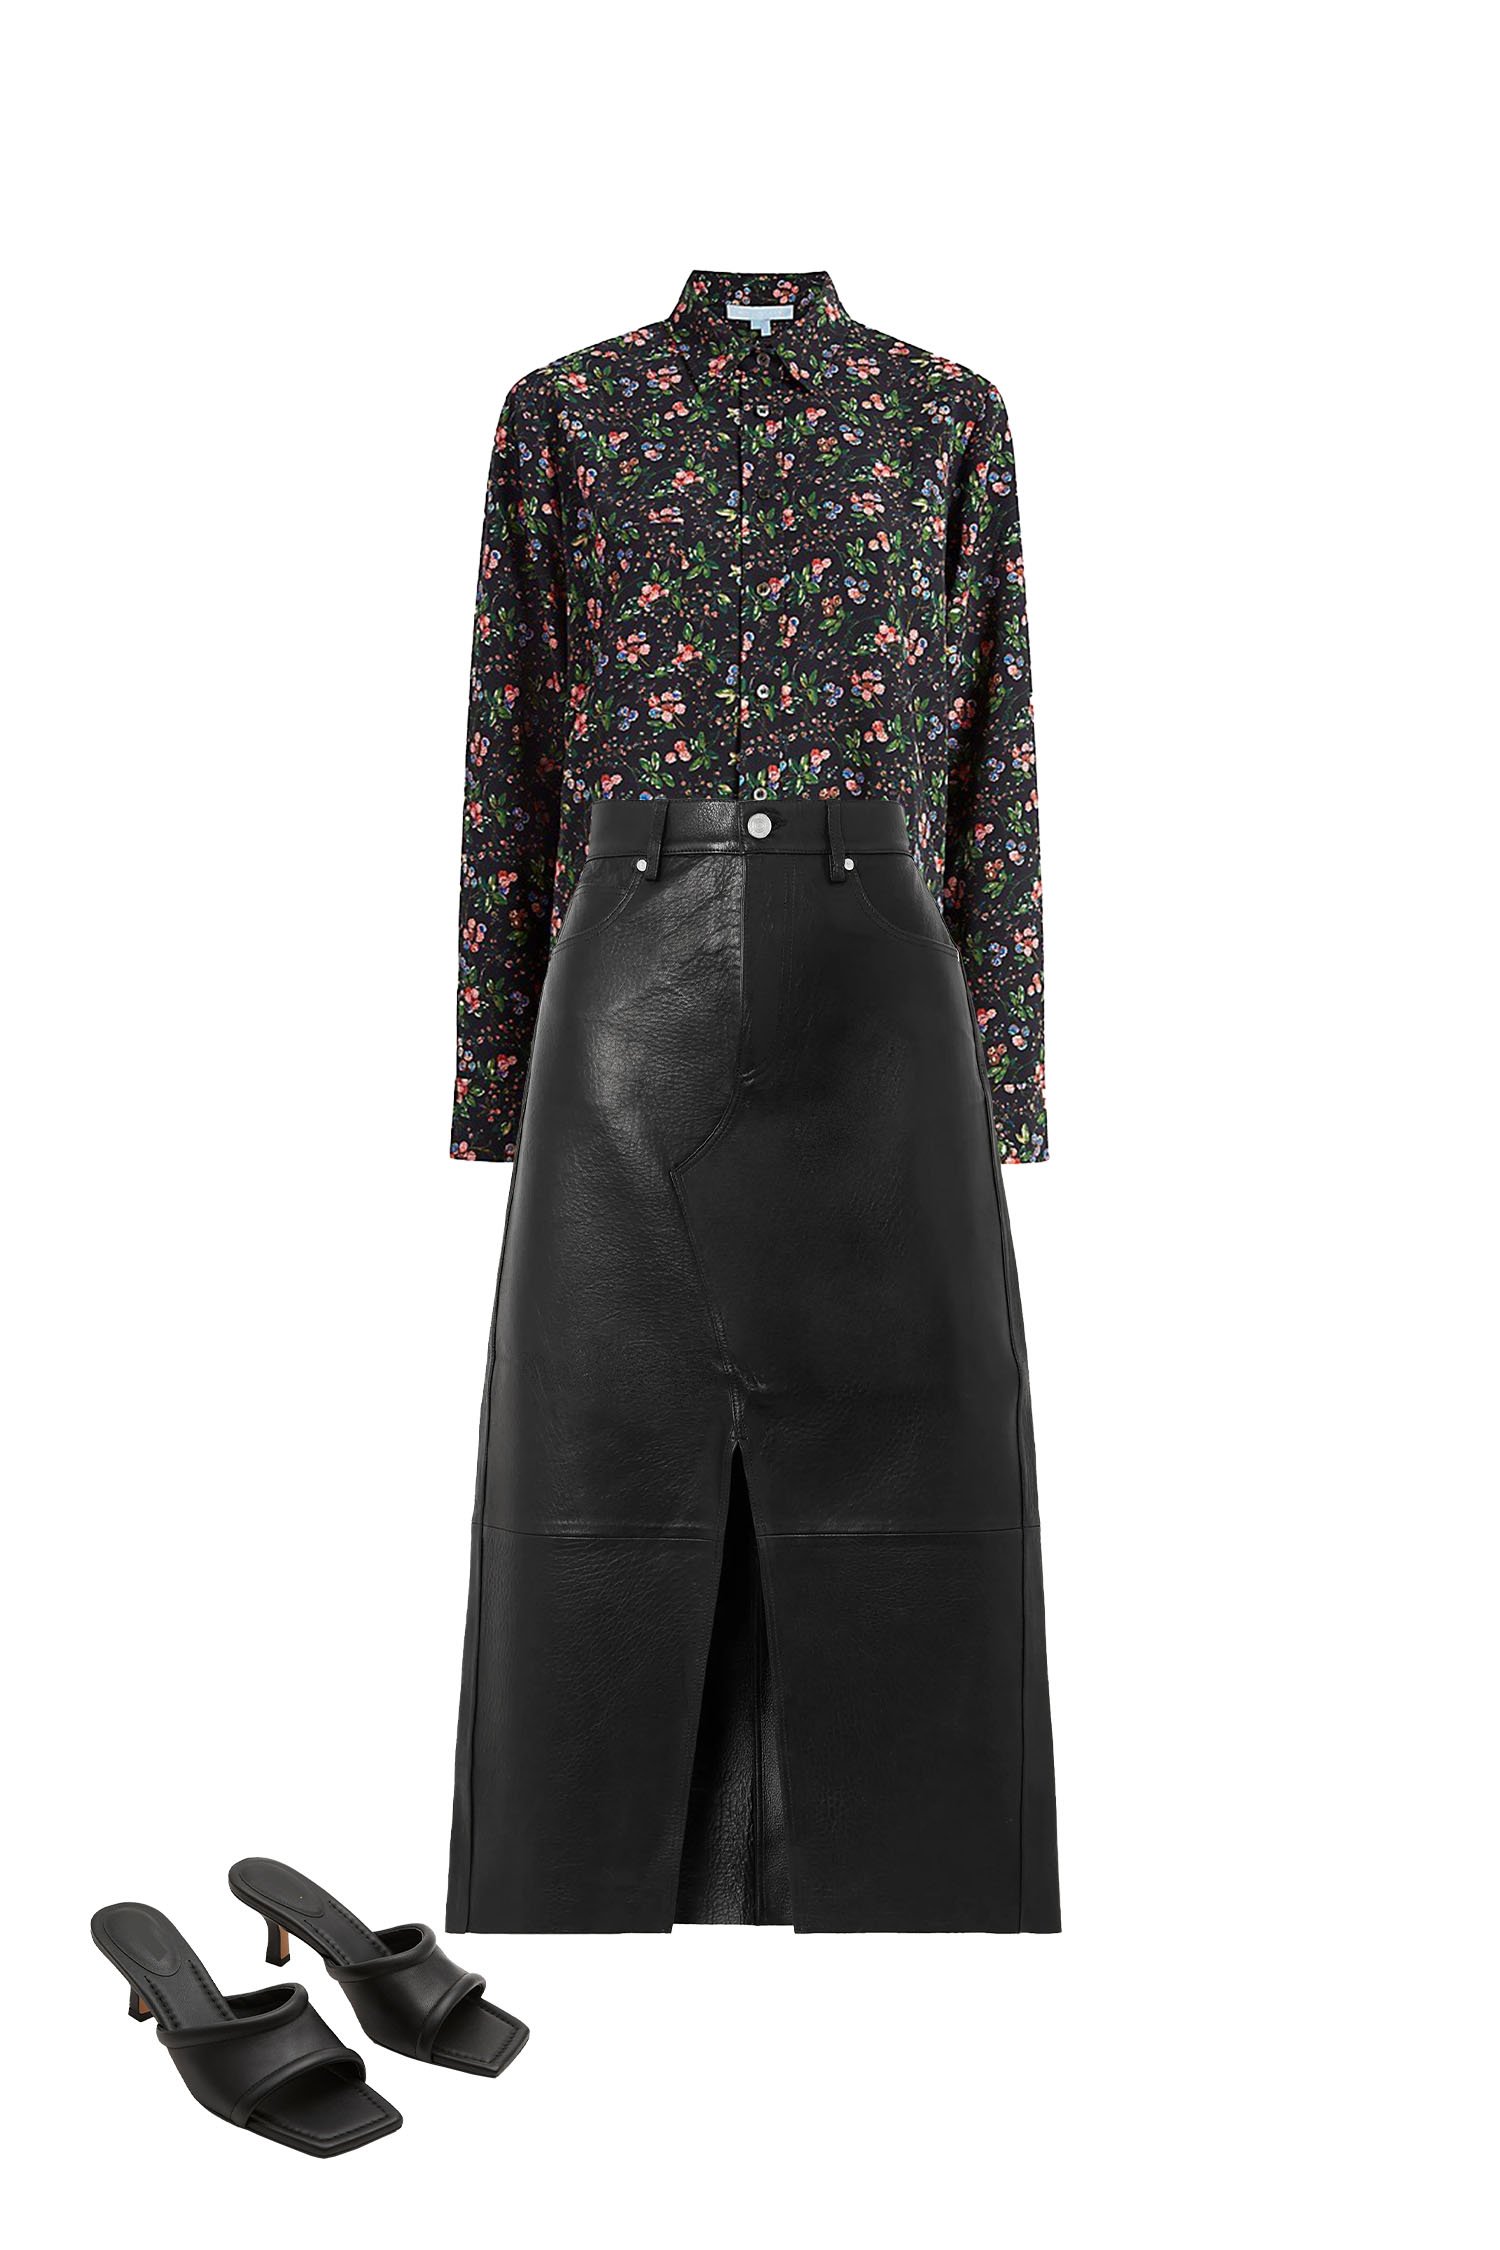 Black Leather Midi Skirt Outfit with Black Floral Print Shirt, and Black Square Toe Kitten Heel Sandals